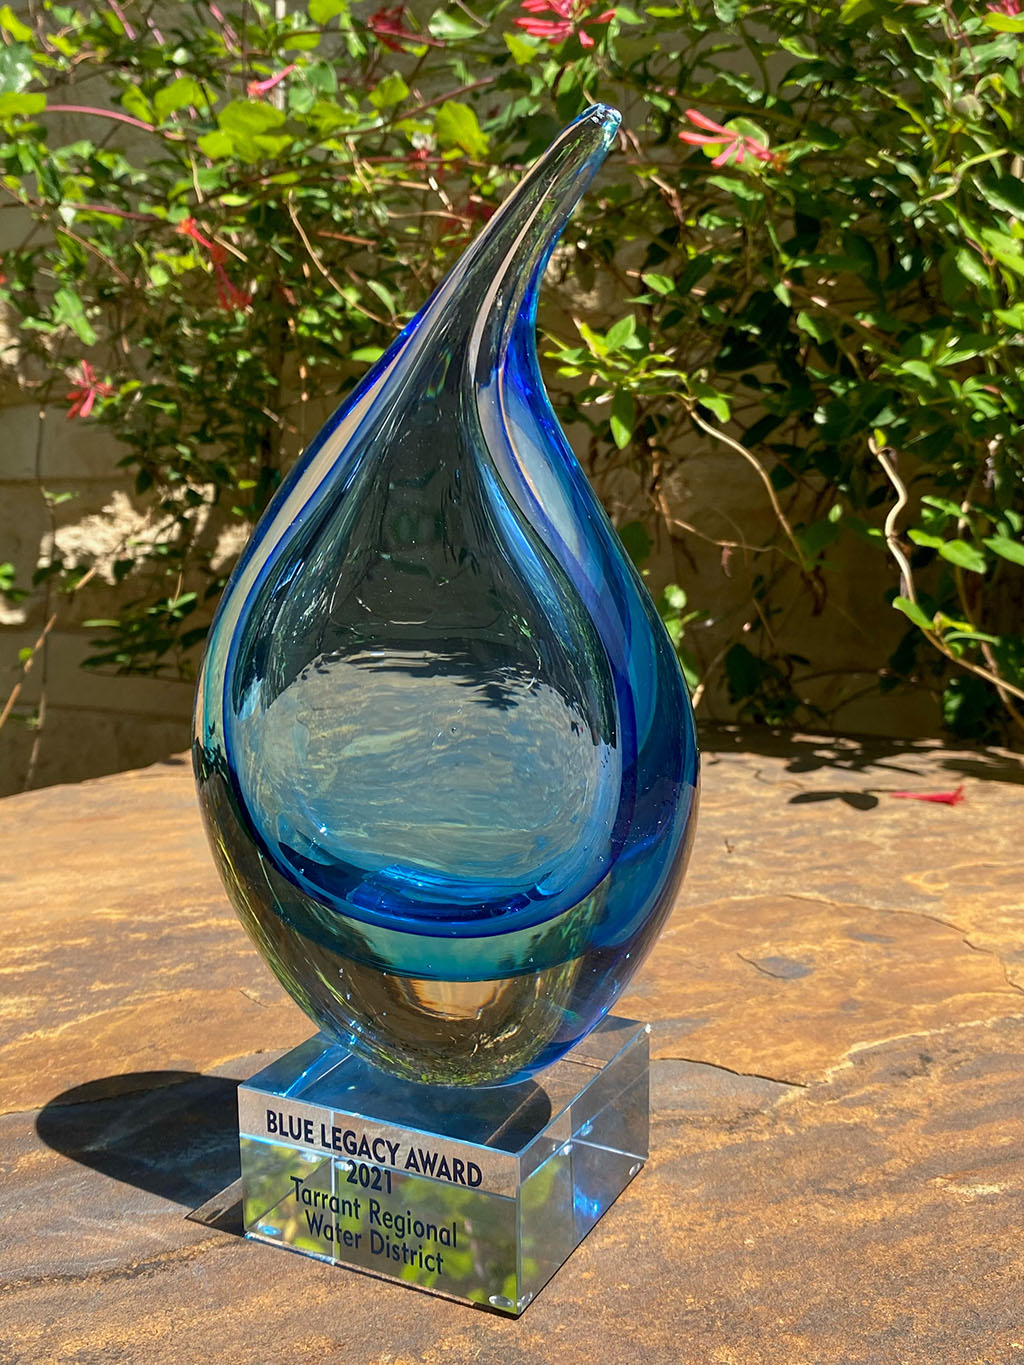 TRWD receives 2021 Blue Legacy Award from the Water Conservation Advisory Council